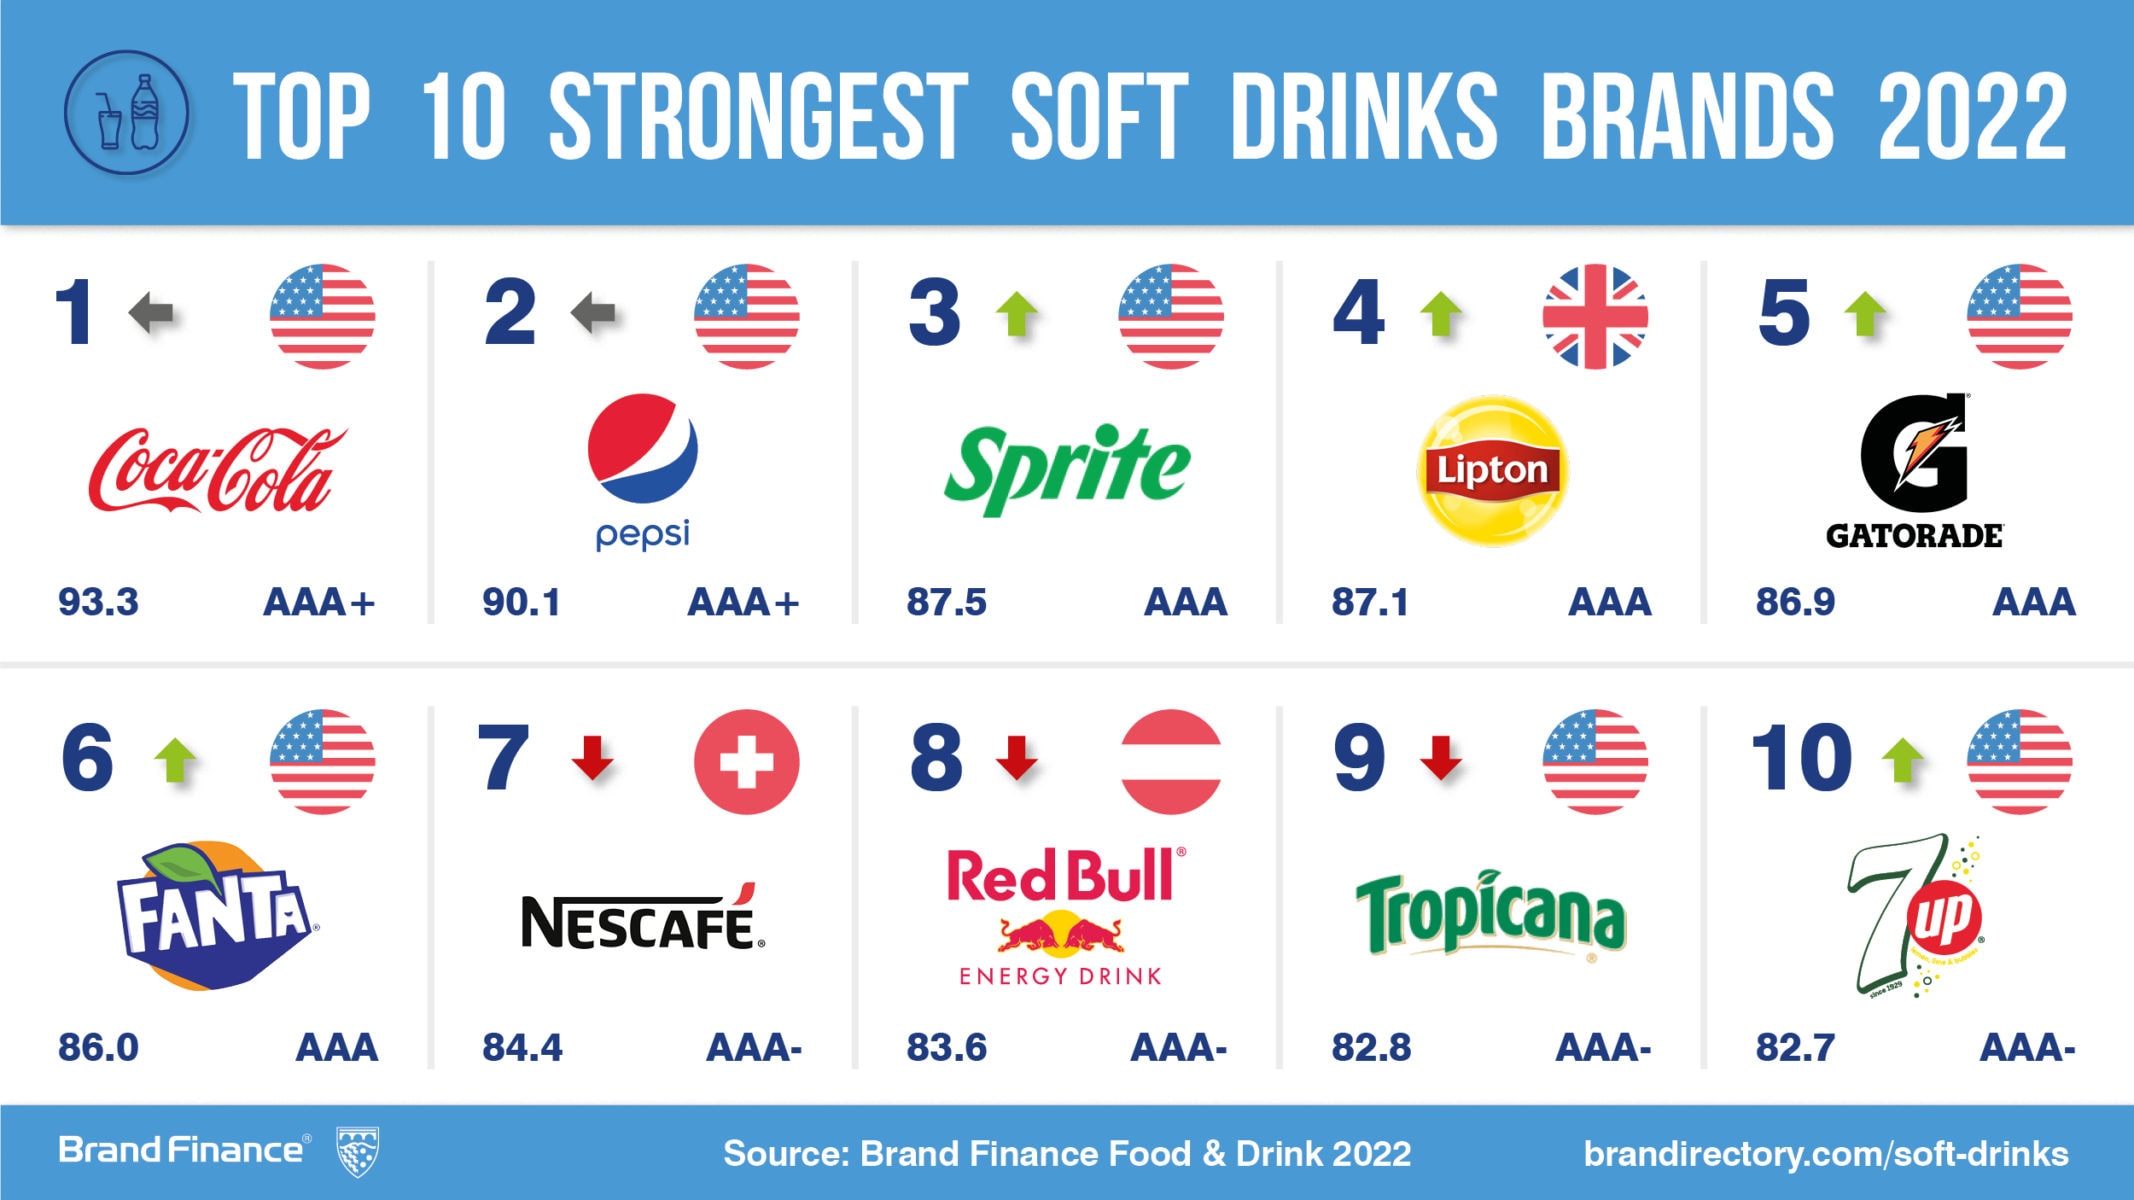 Non-alcoholic drinks brands are sparkling as the world looks to post-COVID  future, Press Release